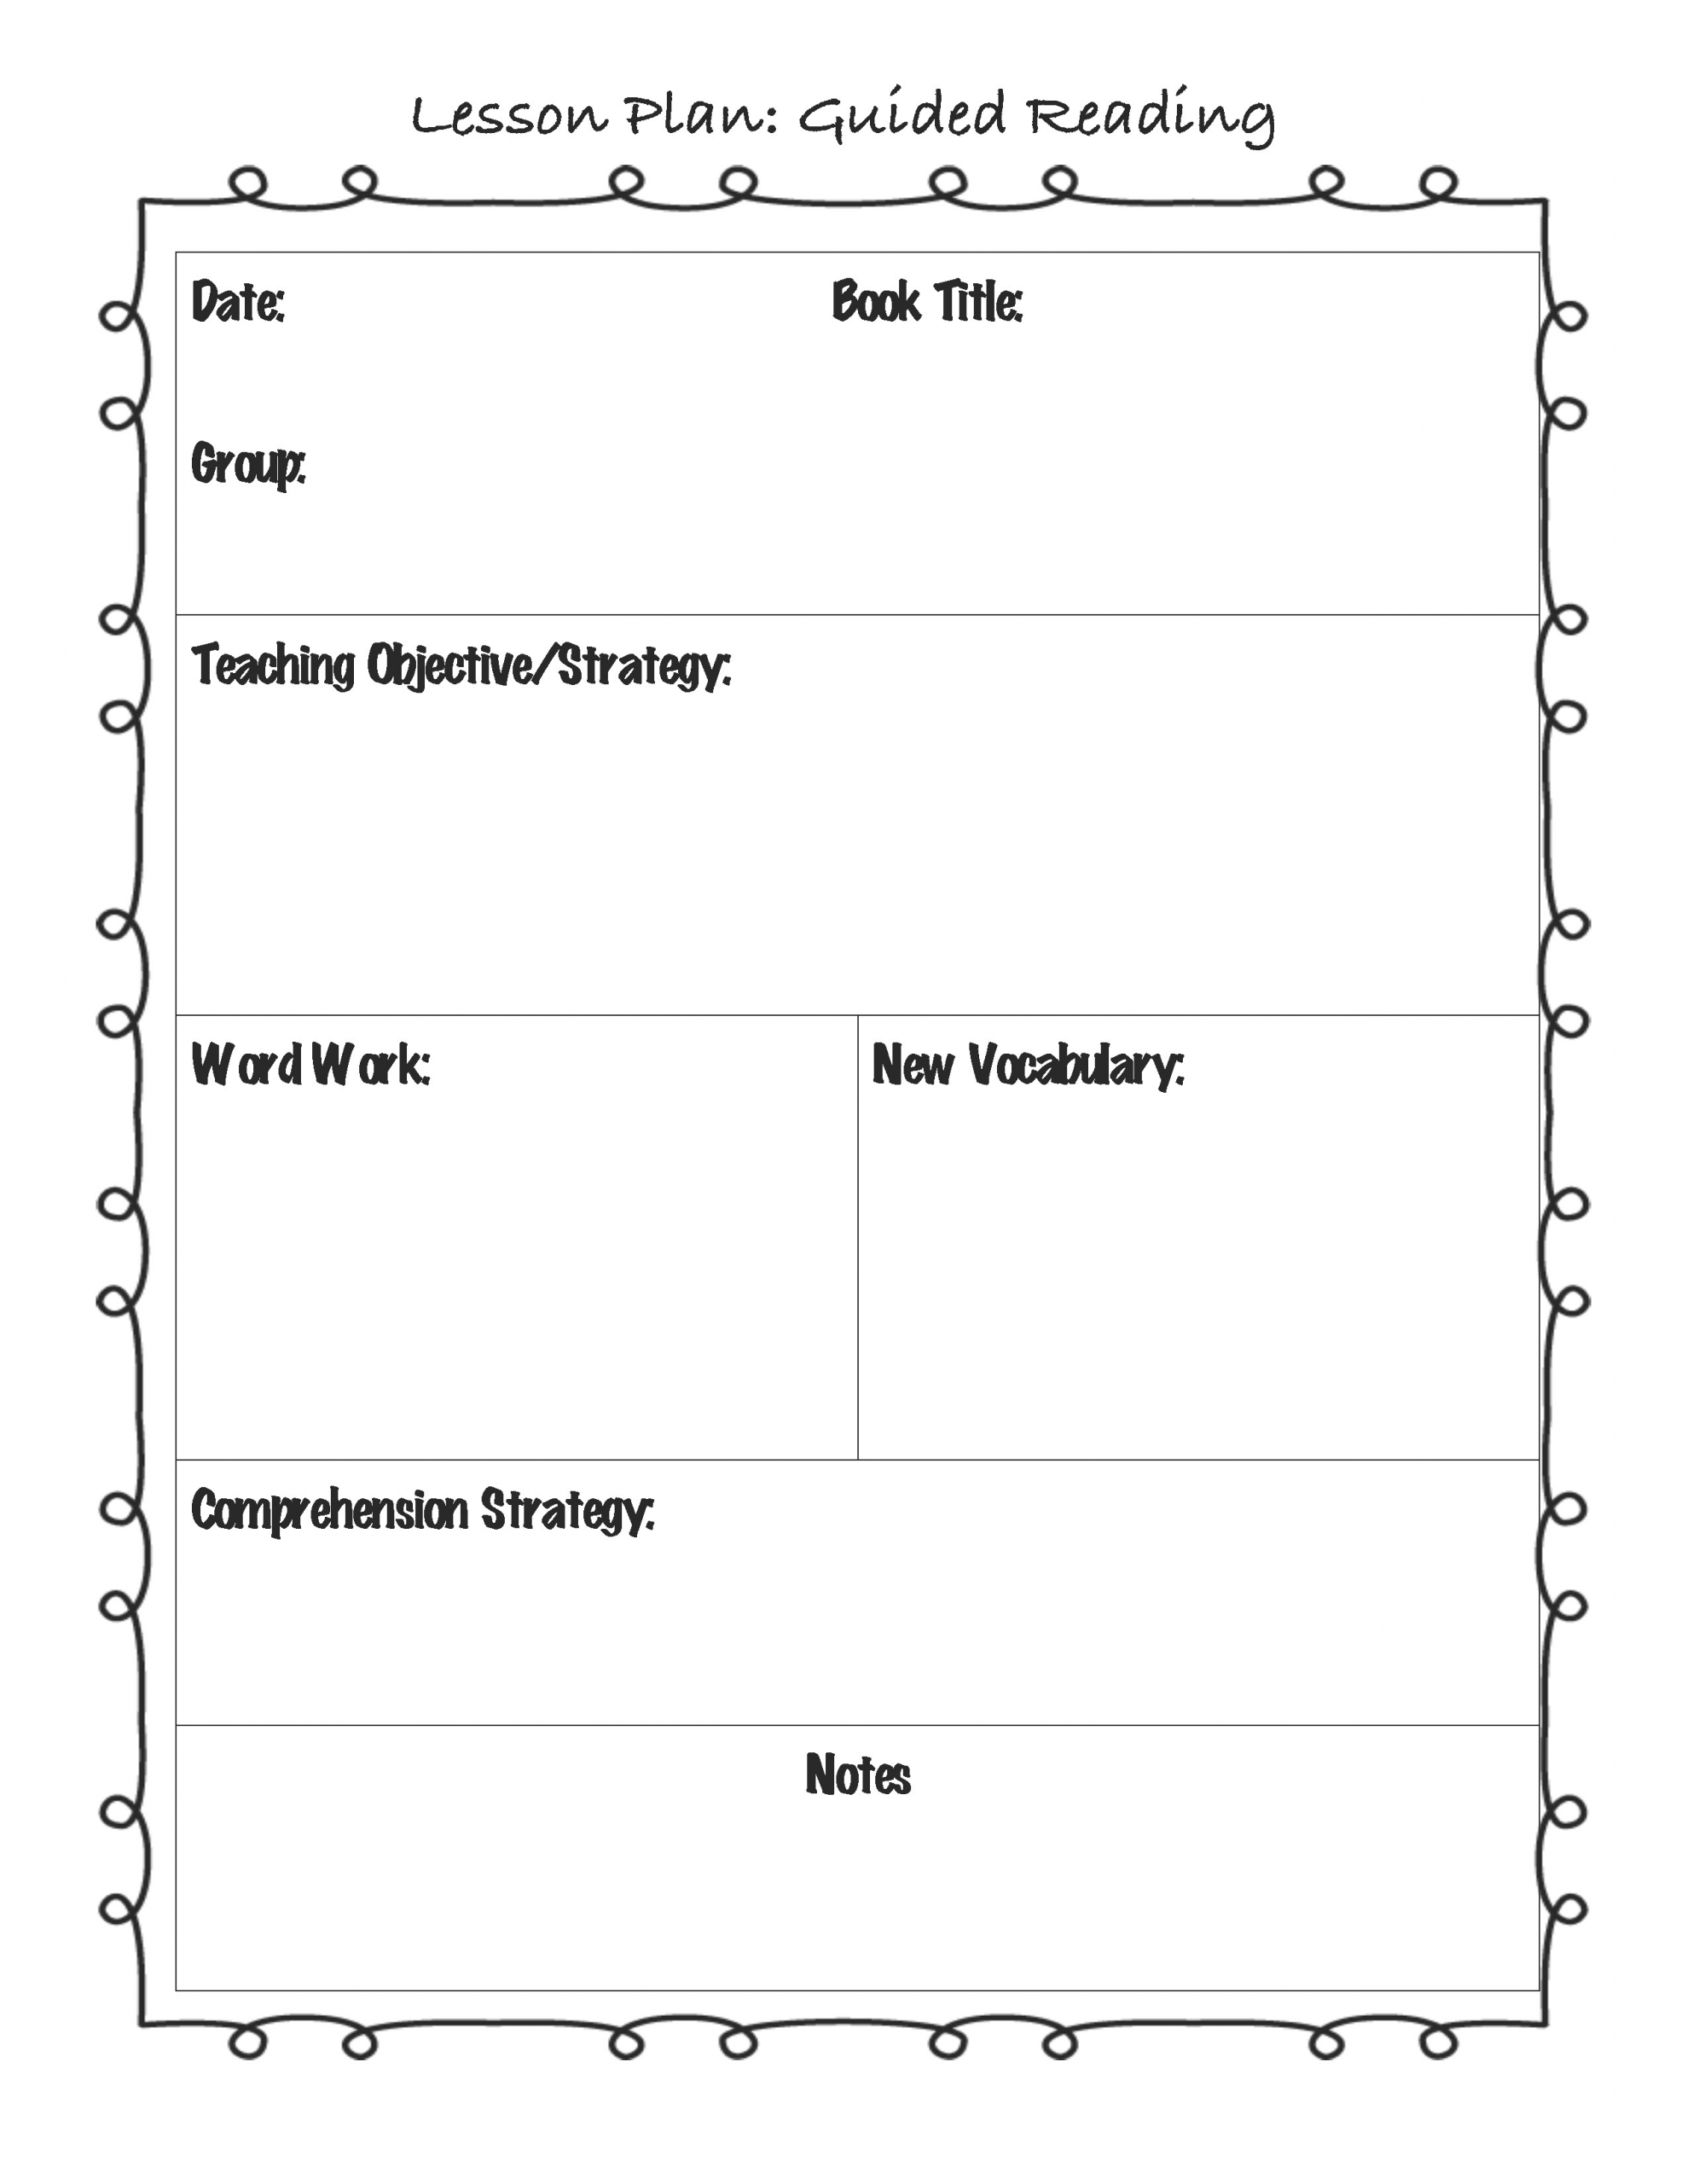 Guided Reading Lesson Plans Guided Reading Lesson Plan Template